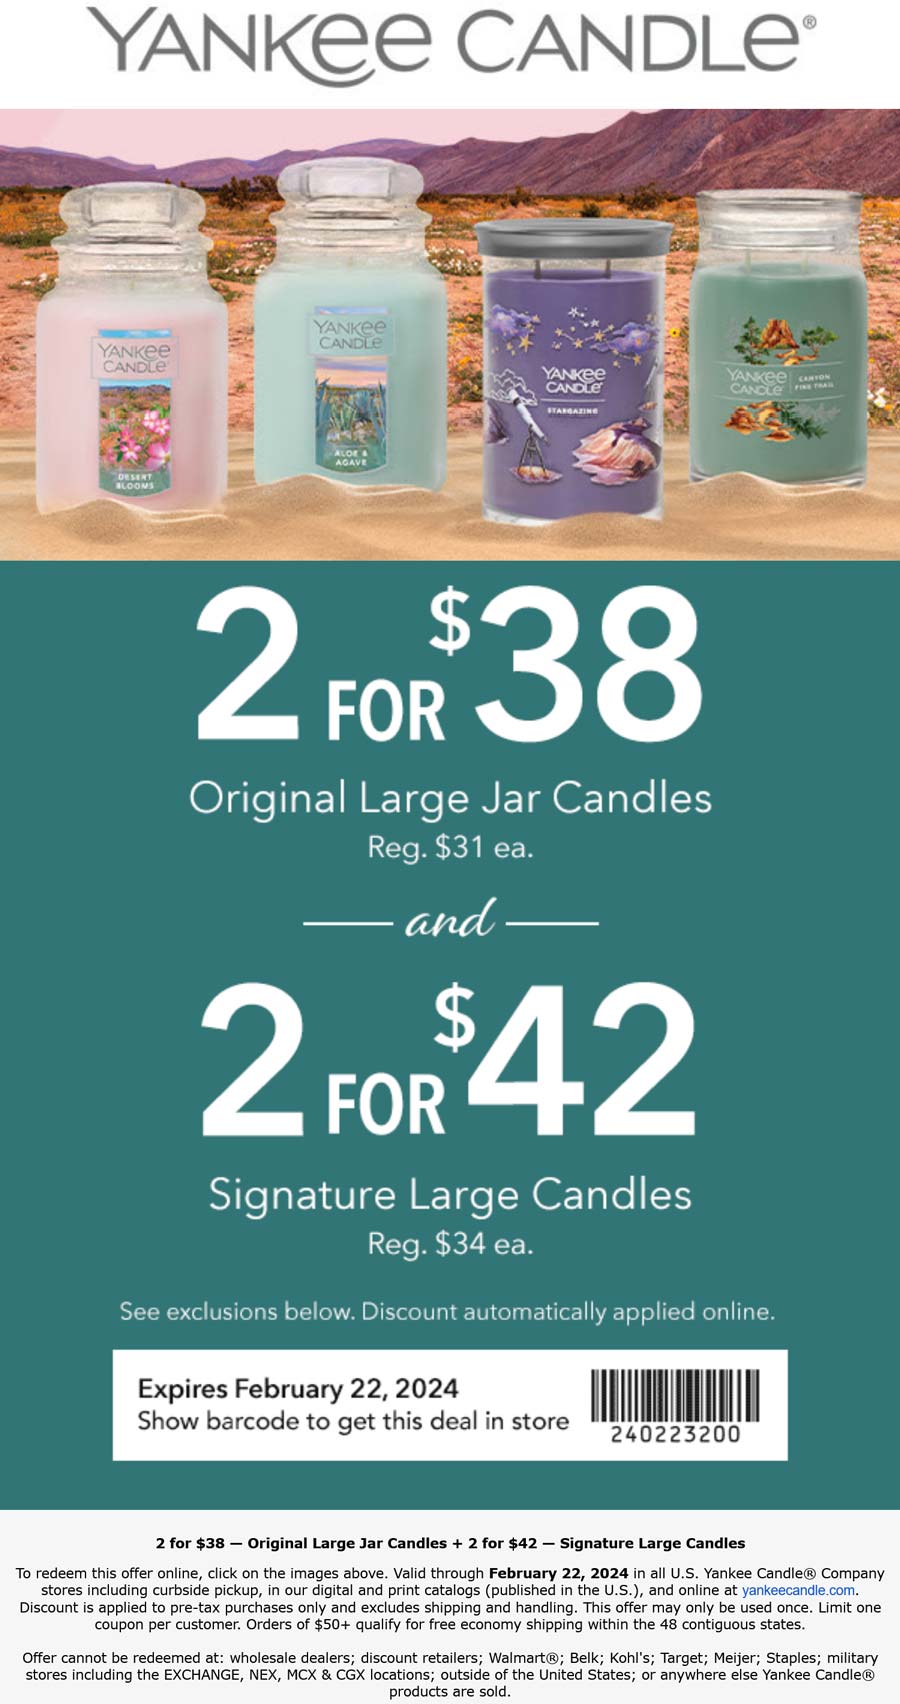 Yankee Candle stores Coupon  2 large candles for $38 today at Yankee Candle, ditto online #yankeecandle 